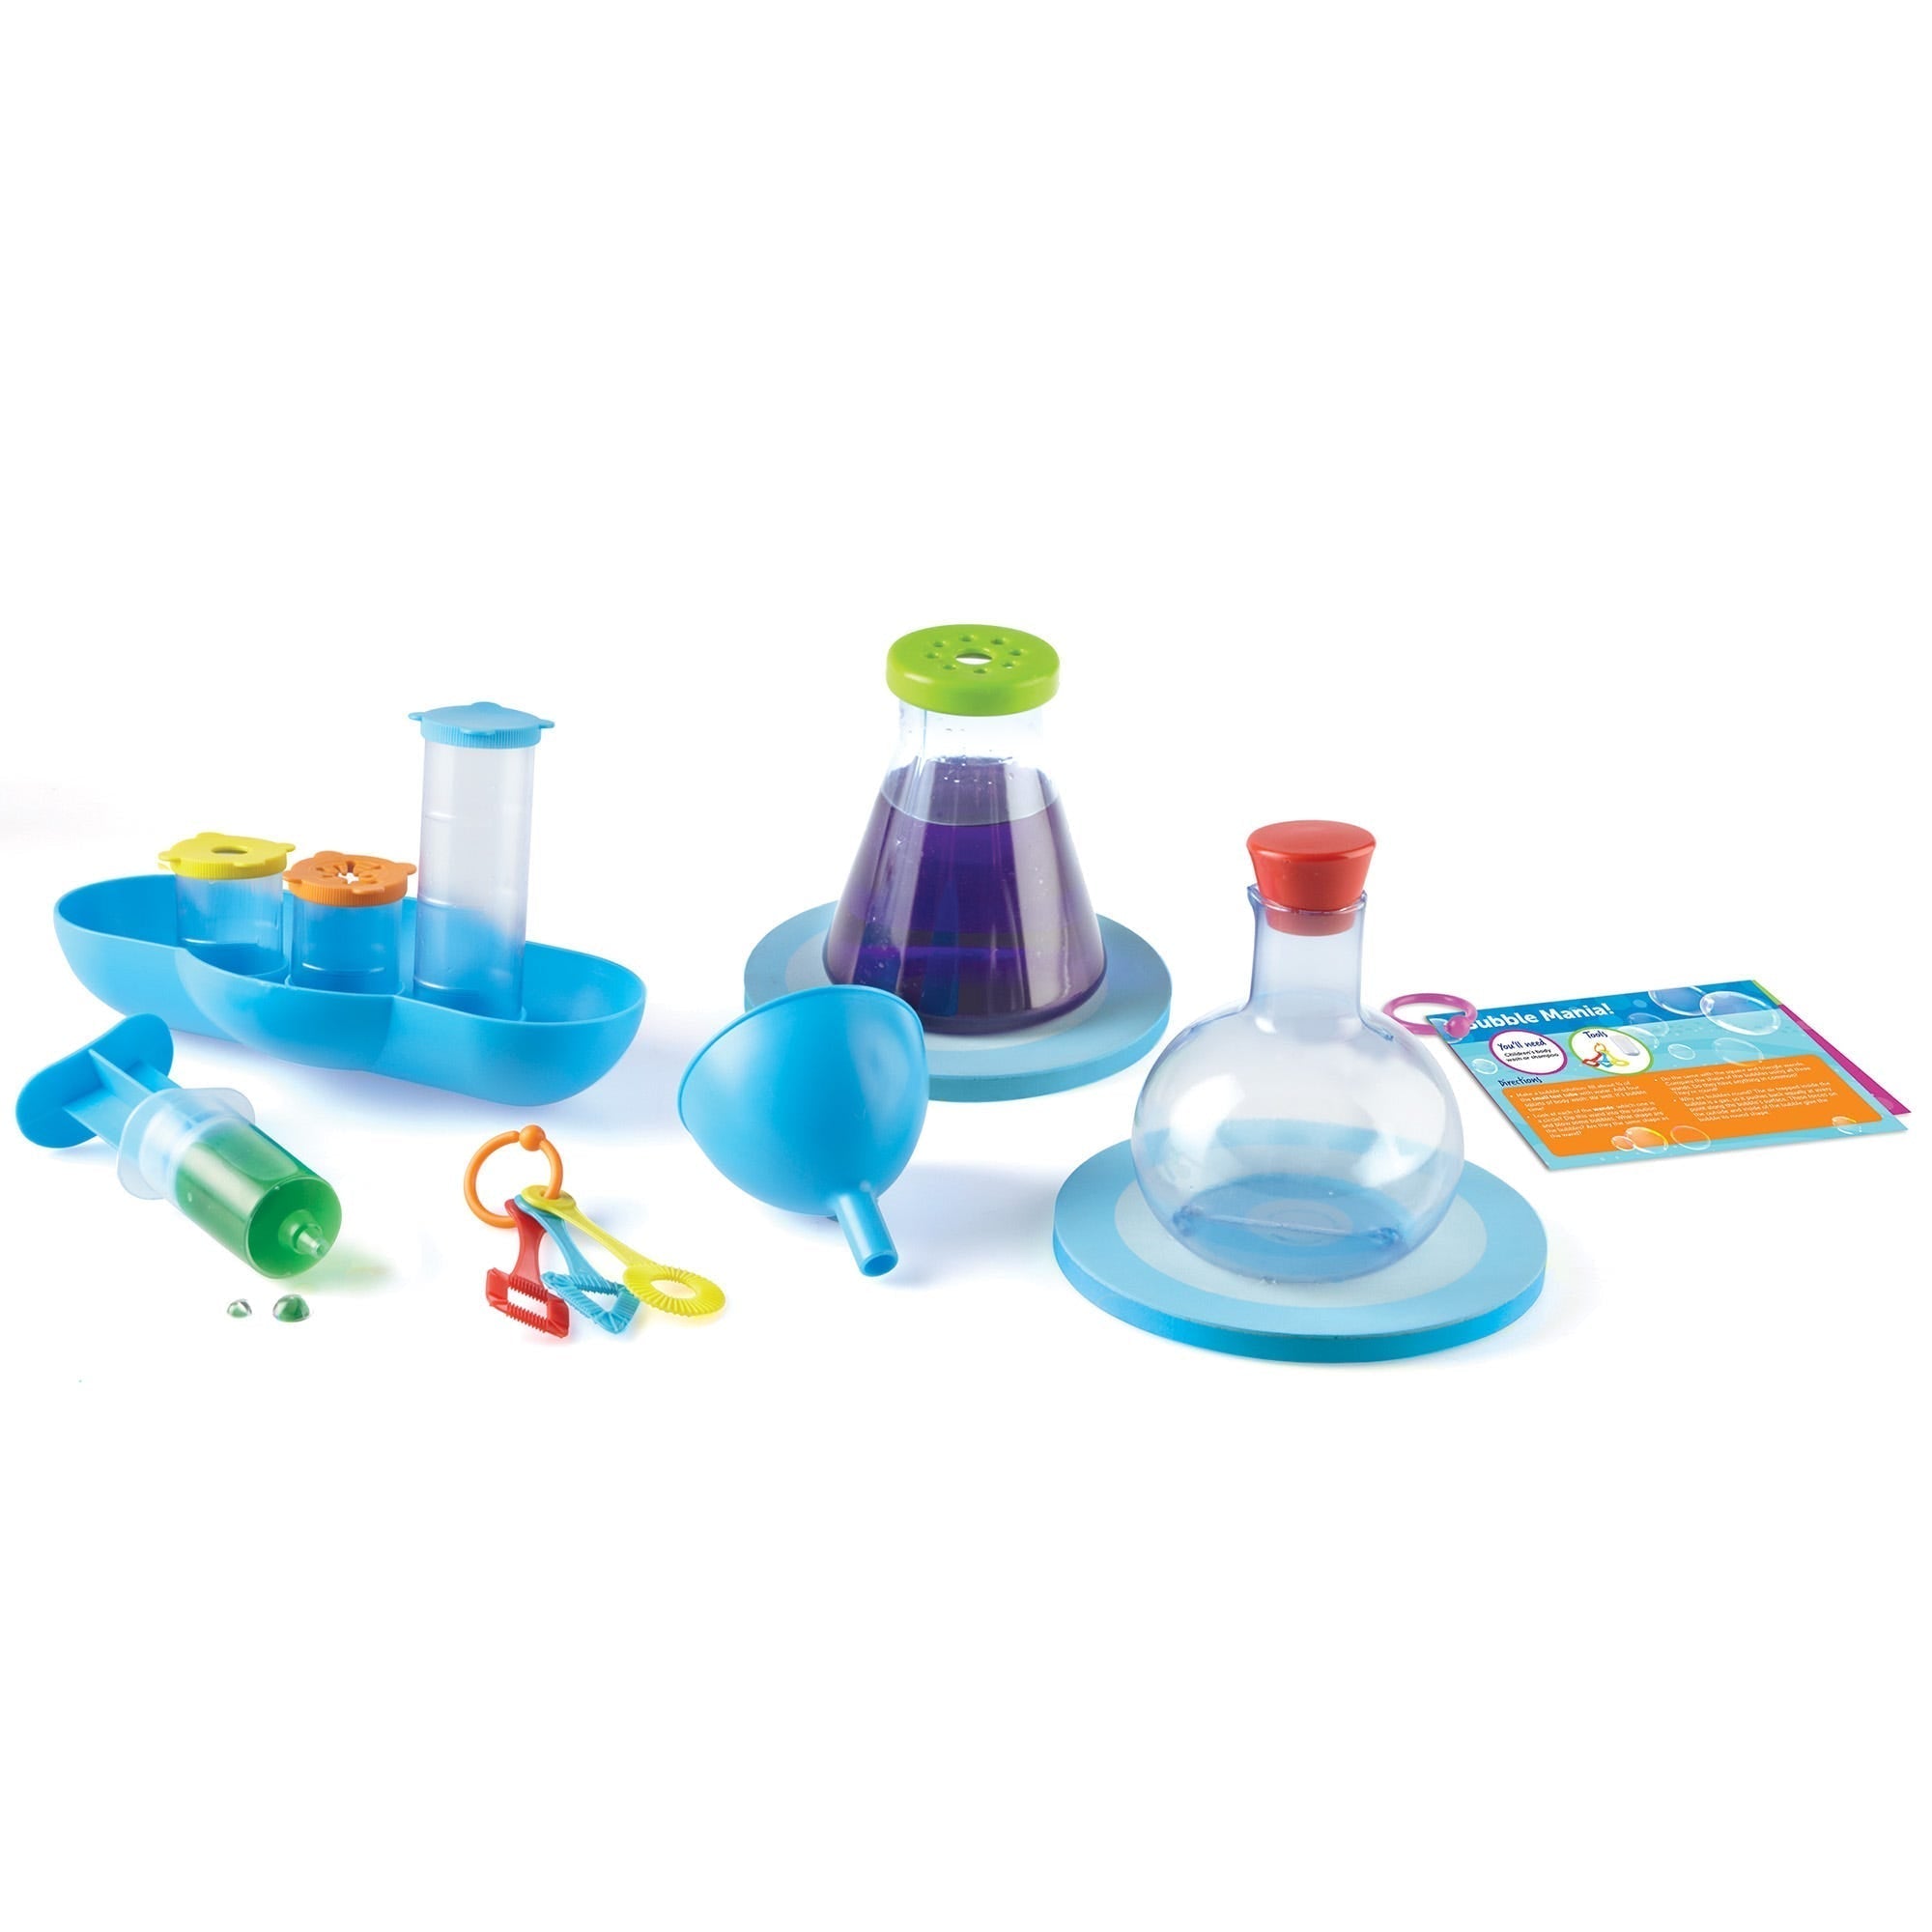 Splashology Water Lab, Splashology! The crazy, water splashing, action fun! Children can use the multiple tools for hands-on experiments in the bath, the beach or even a water table. Learn about volume, buoyancy, water flow and more with this water science lab. Dive into the wonders of this water science kit with the splash-filled experiments for kids of Splashology! Water Lab. Designed for the bath, sink, or water table, this kids science experiment set teaches STEM at play through water activities for kid